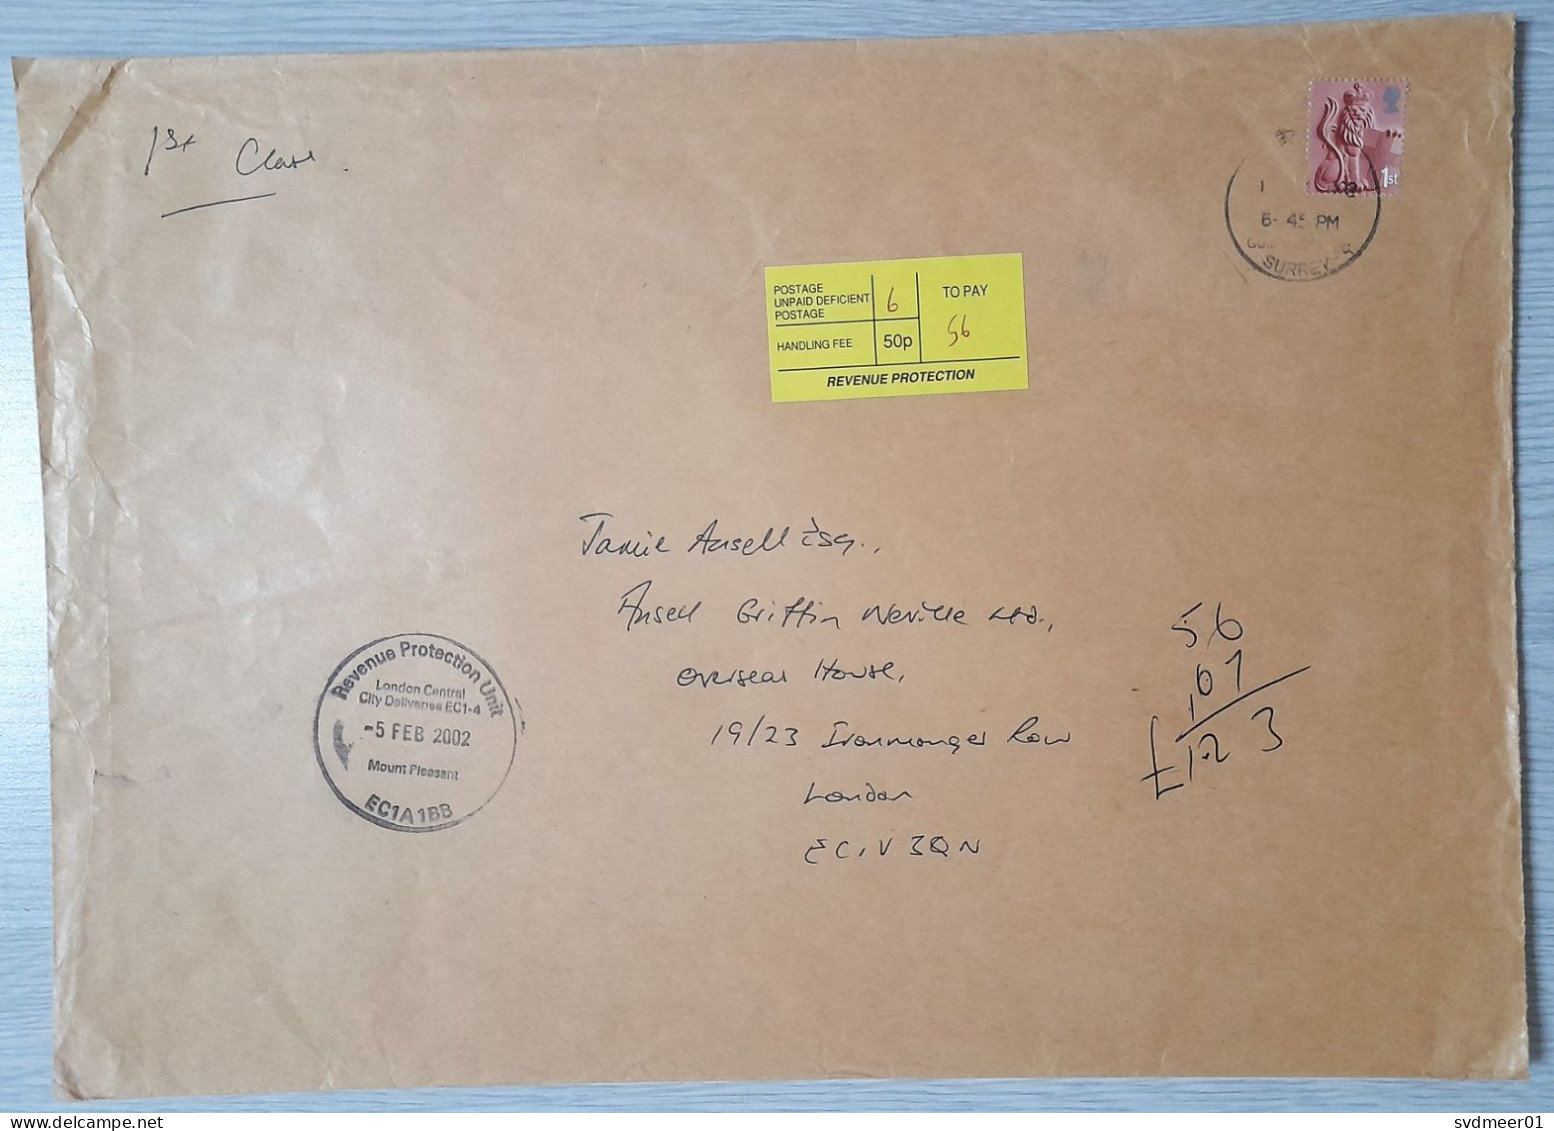 UK: Large Cover, 2002, 1 Stamp, Heraldry, Label & Cancel To Pay, Postage Due, Taxed, Revenue Protection (minor Creases) - Covers & Documents